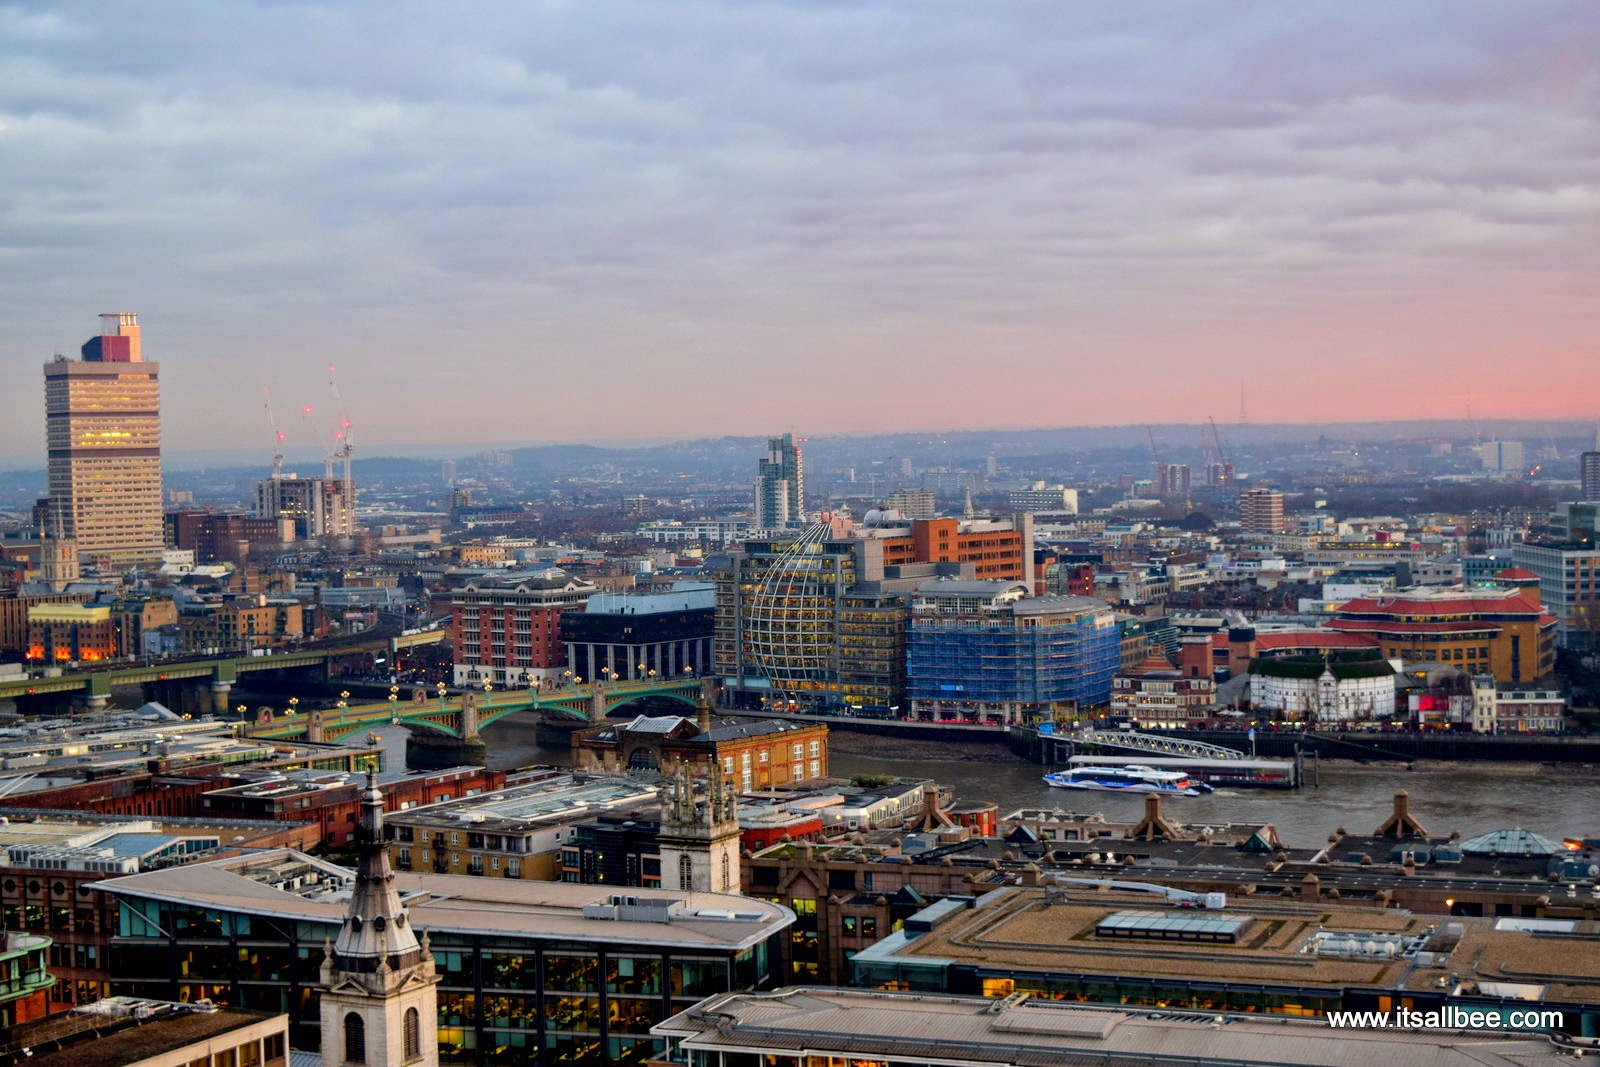 Sunset In London | 5 Top Places For The Best Sunset Views Of The London Skyline